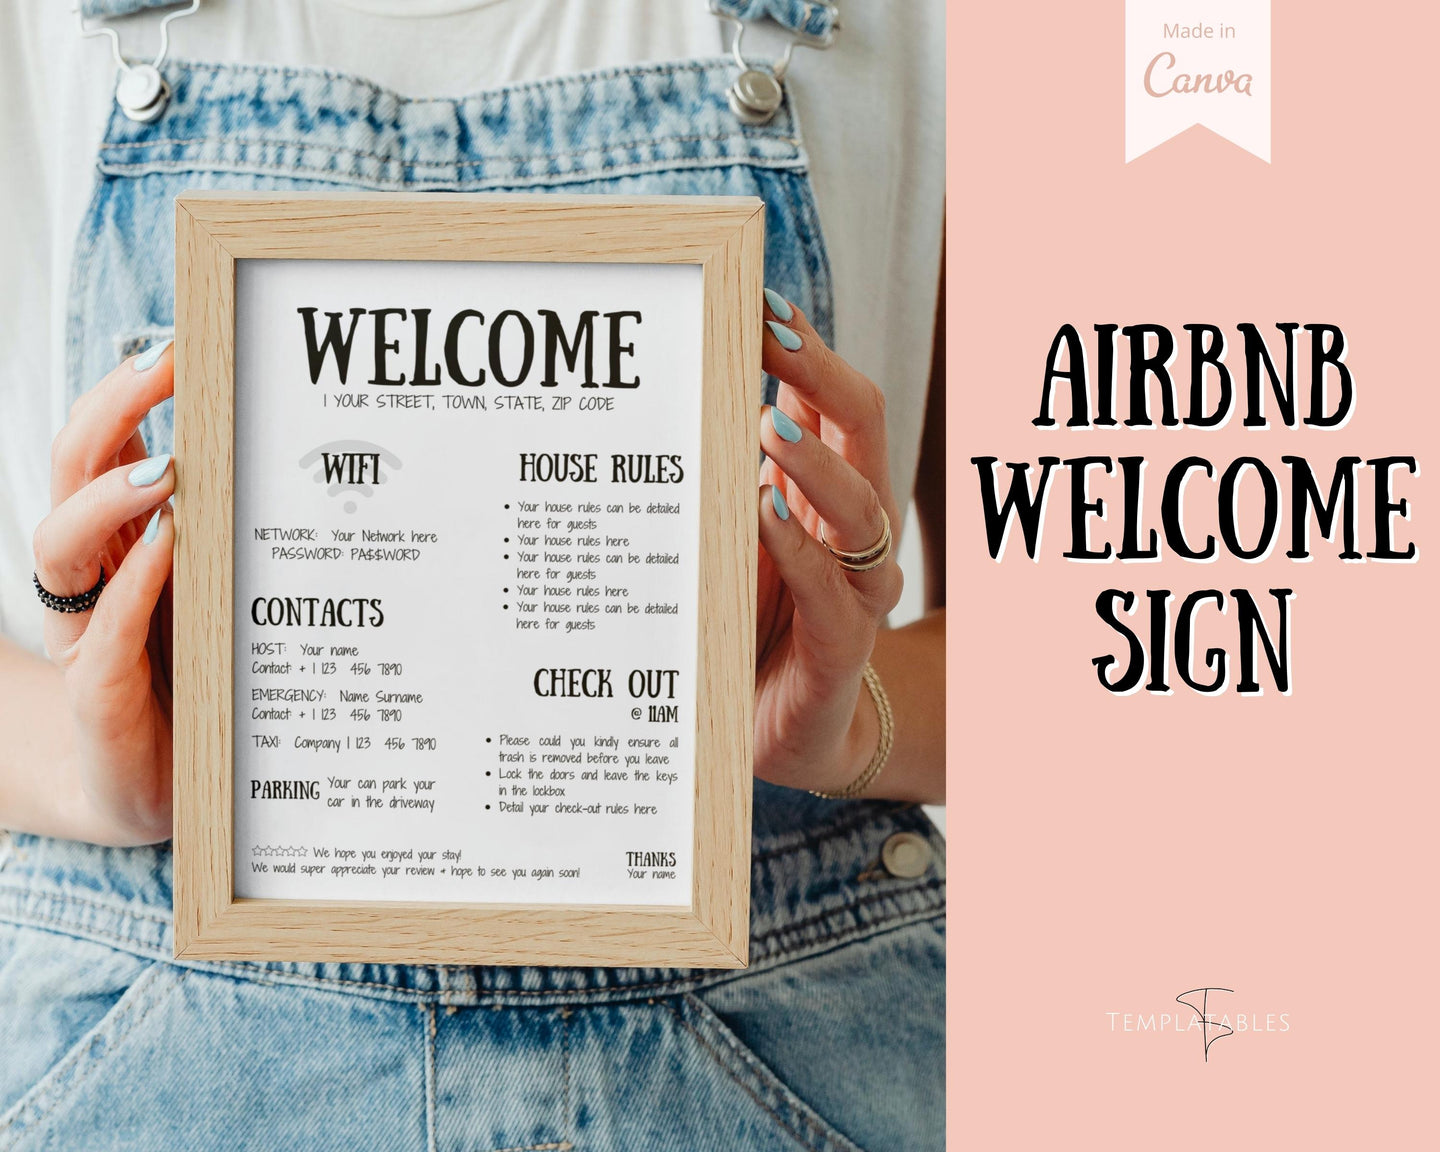 Airbnb Welcome Sign Poster Template | Printable Airbnb Host Vacation Rental Sign | Farmhouse